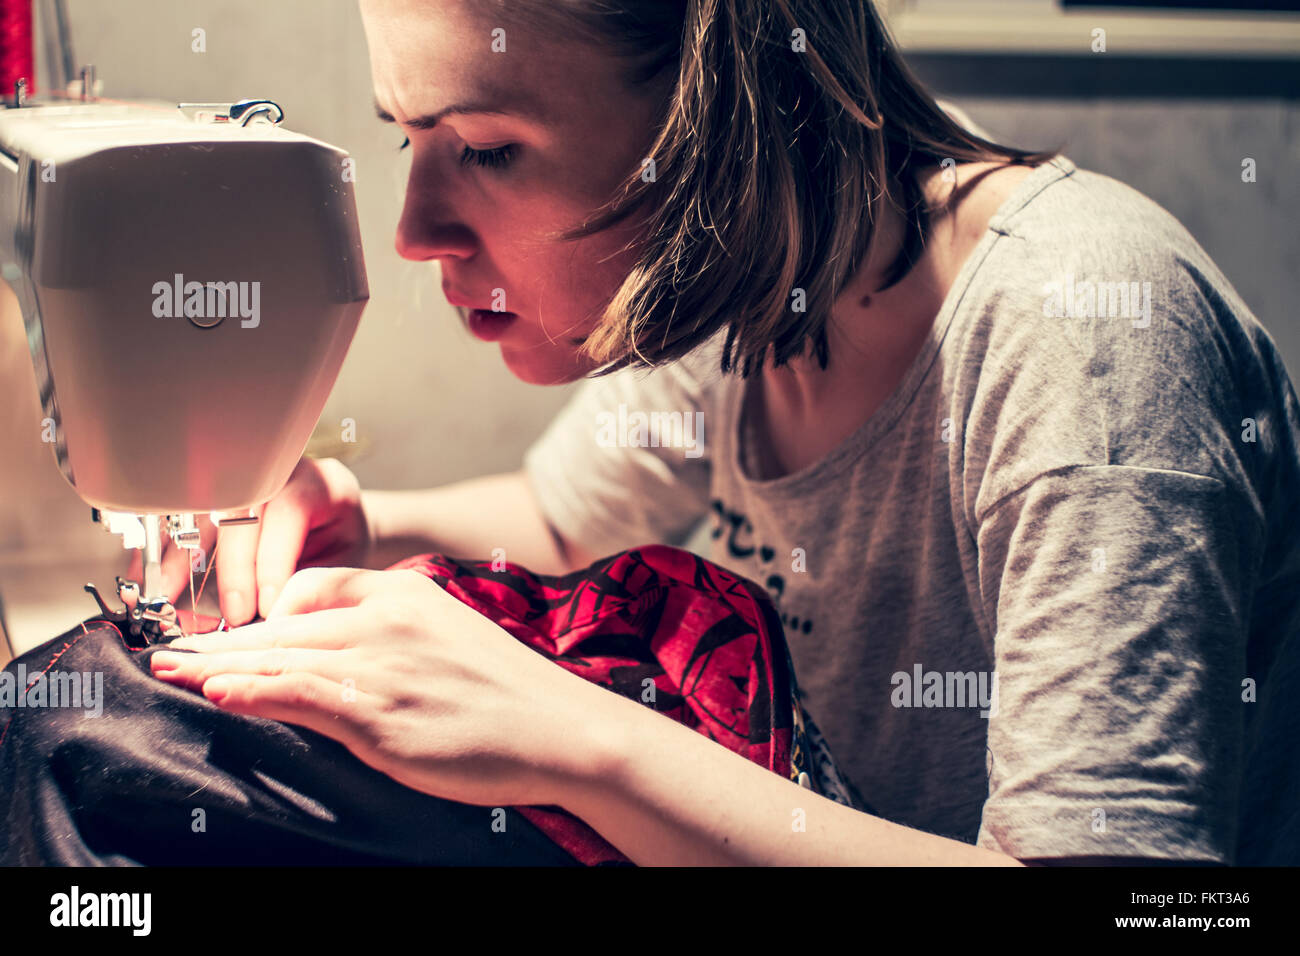 Caucasian woman using sewing machine Banque D'Images